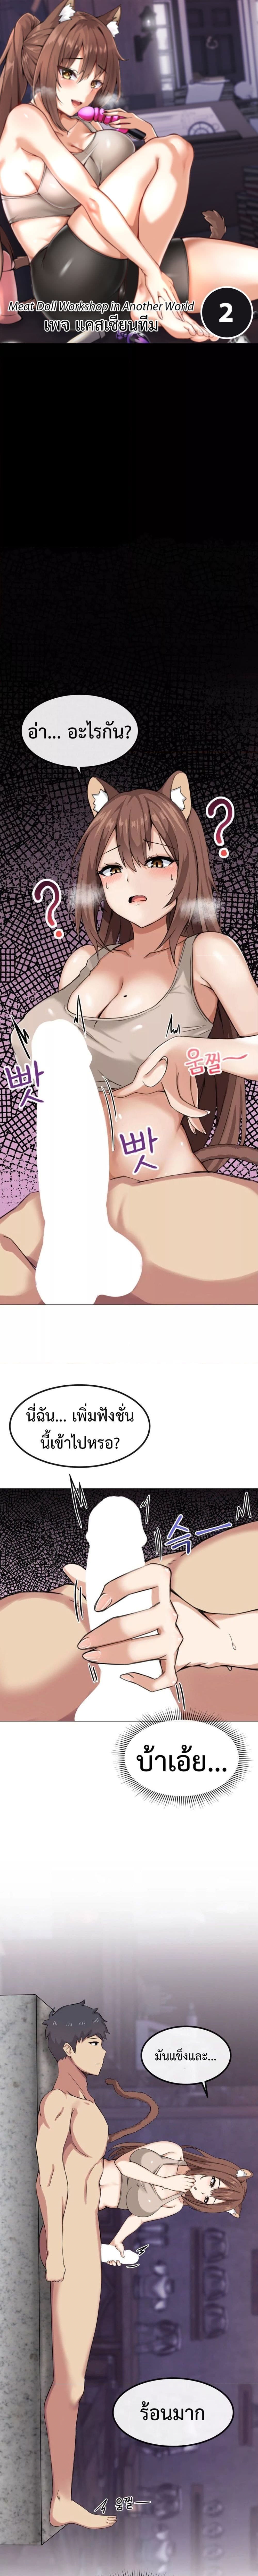 Meat Doll Workshop in Another World ตอนที่ 2 ภาพ 0